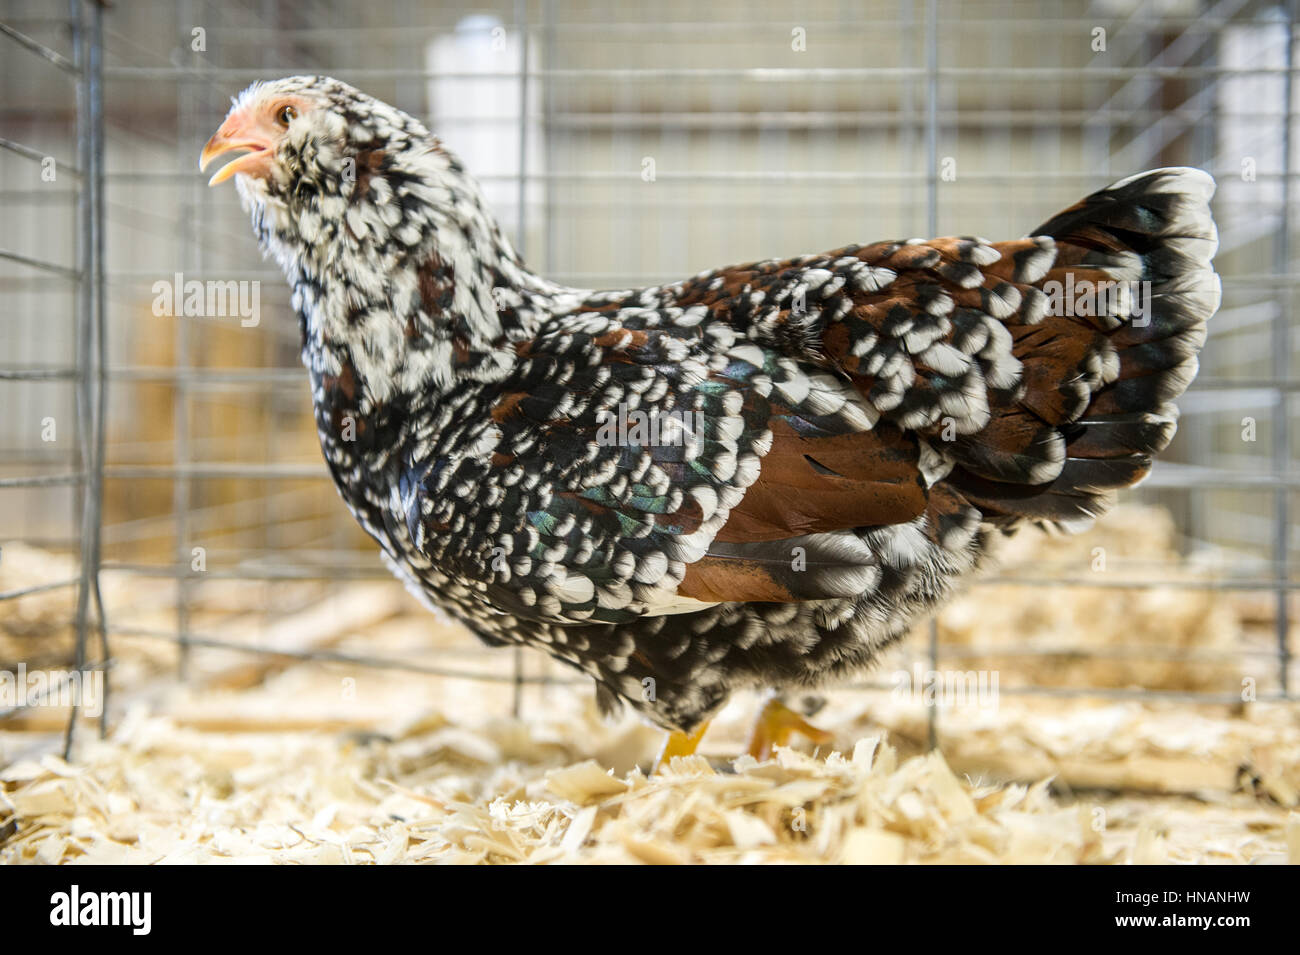 Timonium, Maryland - a chicken stands in a cage at the 2016 Maryland State Fair. Stock Photo